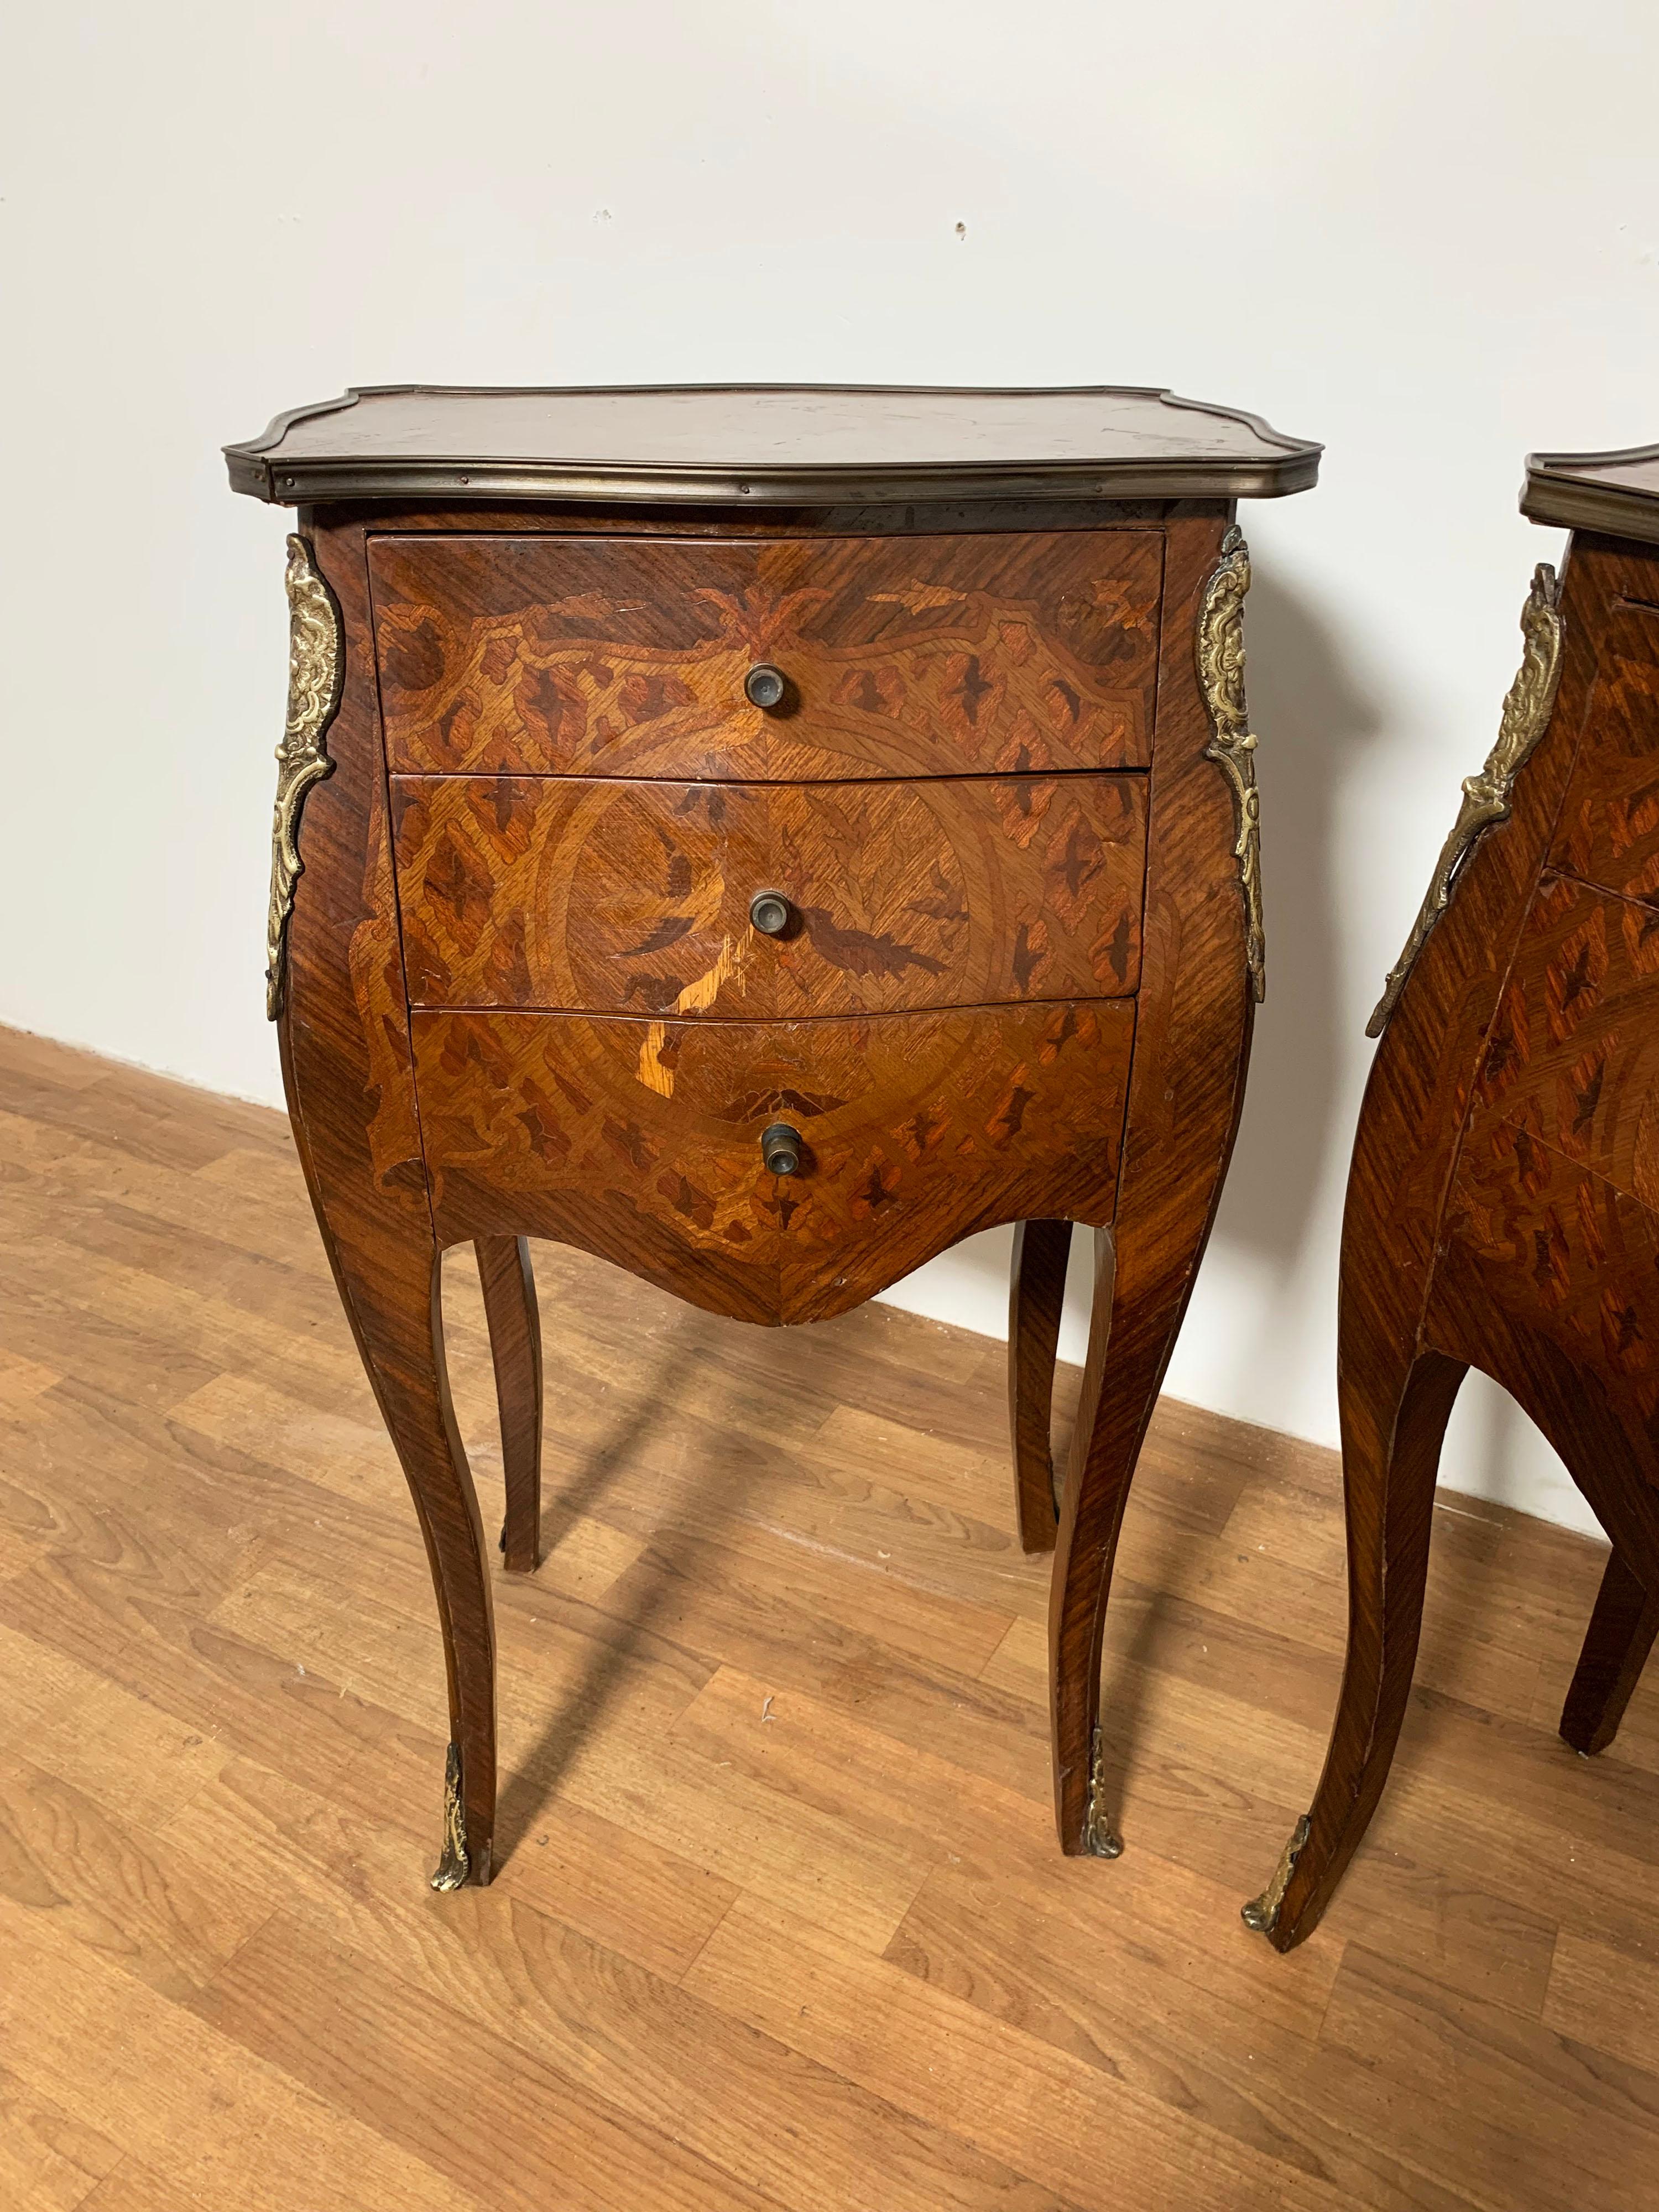 A pair of petit French two drawer chests or side tables with elaborate marquetry on cabriole legs, bronze ormolu and edge banding. Would serve as nightstands well.